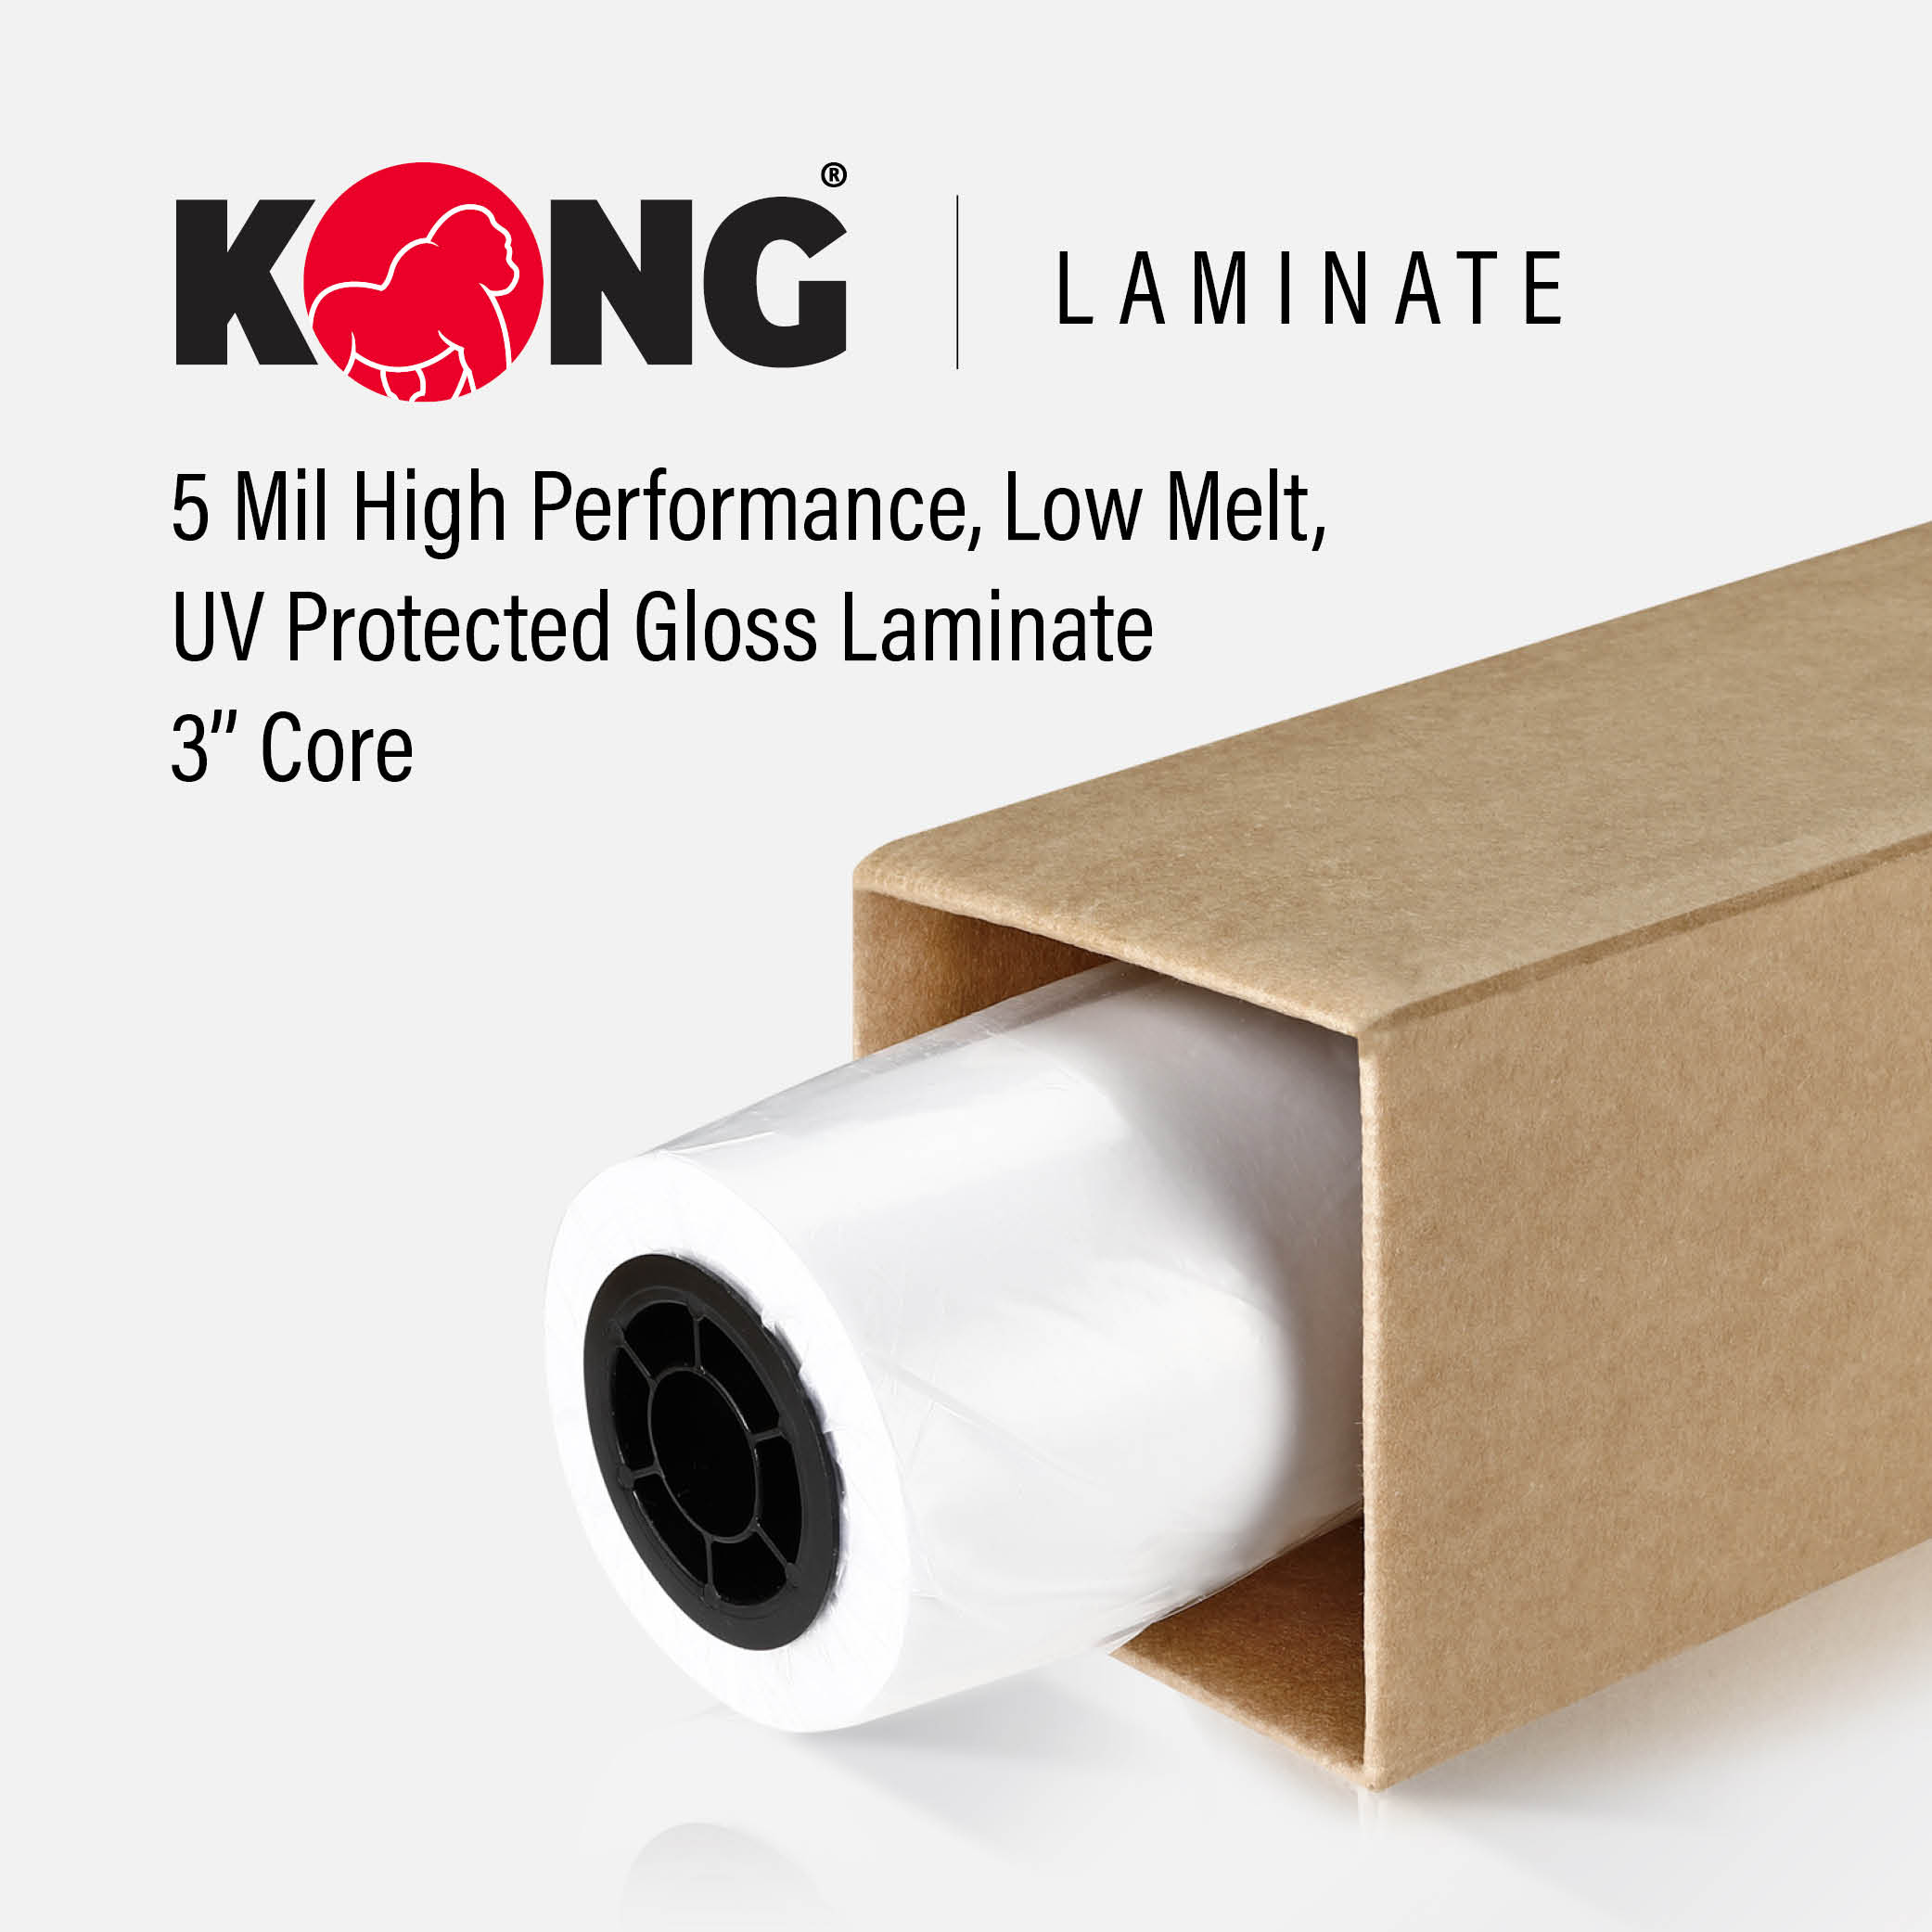 51'' x 250' Roll - 5 MIL High Performance, Low Melt, UV Protected Gloss Laminate - 3'' Core